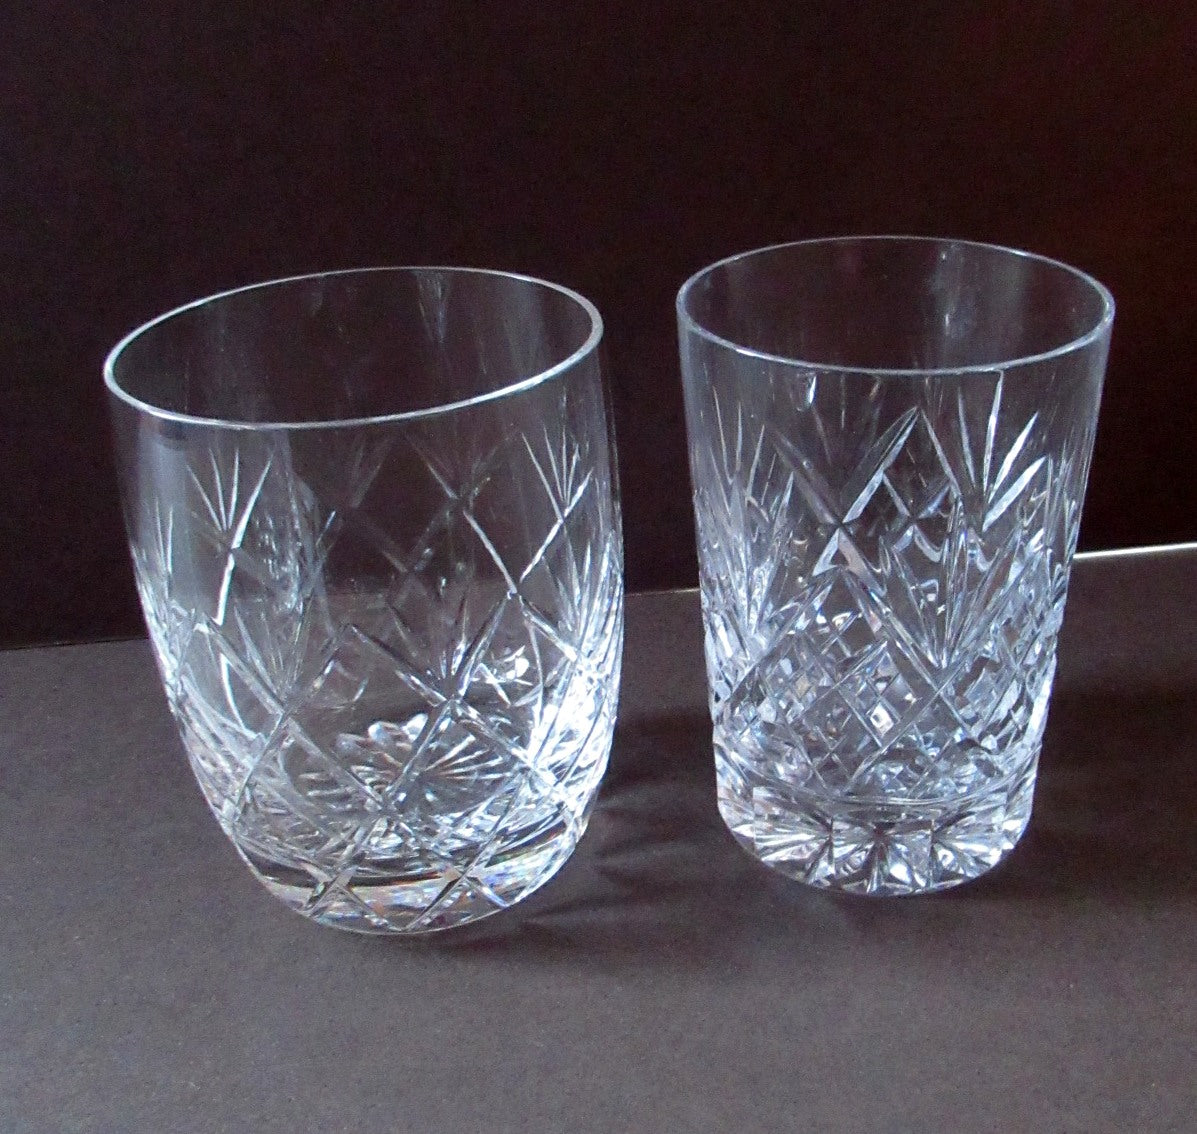 EDINBURGH CRYSTAL. Four Vintage Crystal Tumblers. Two Pairs: One Barrel  Shape and Other Straight Sides